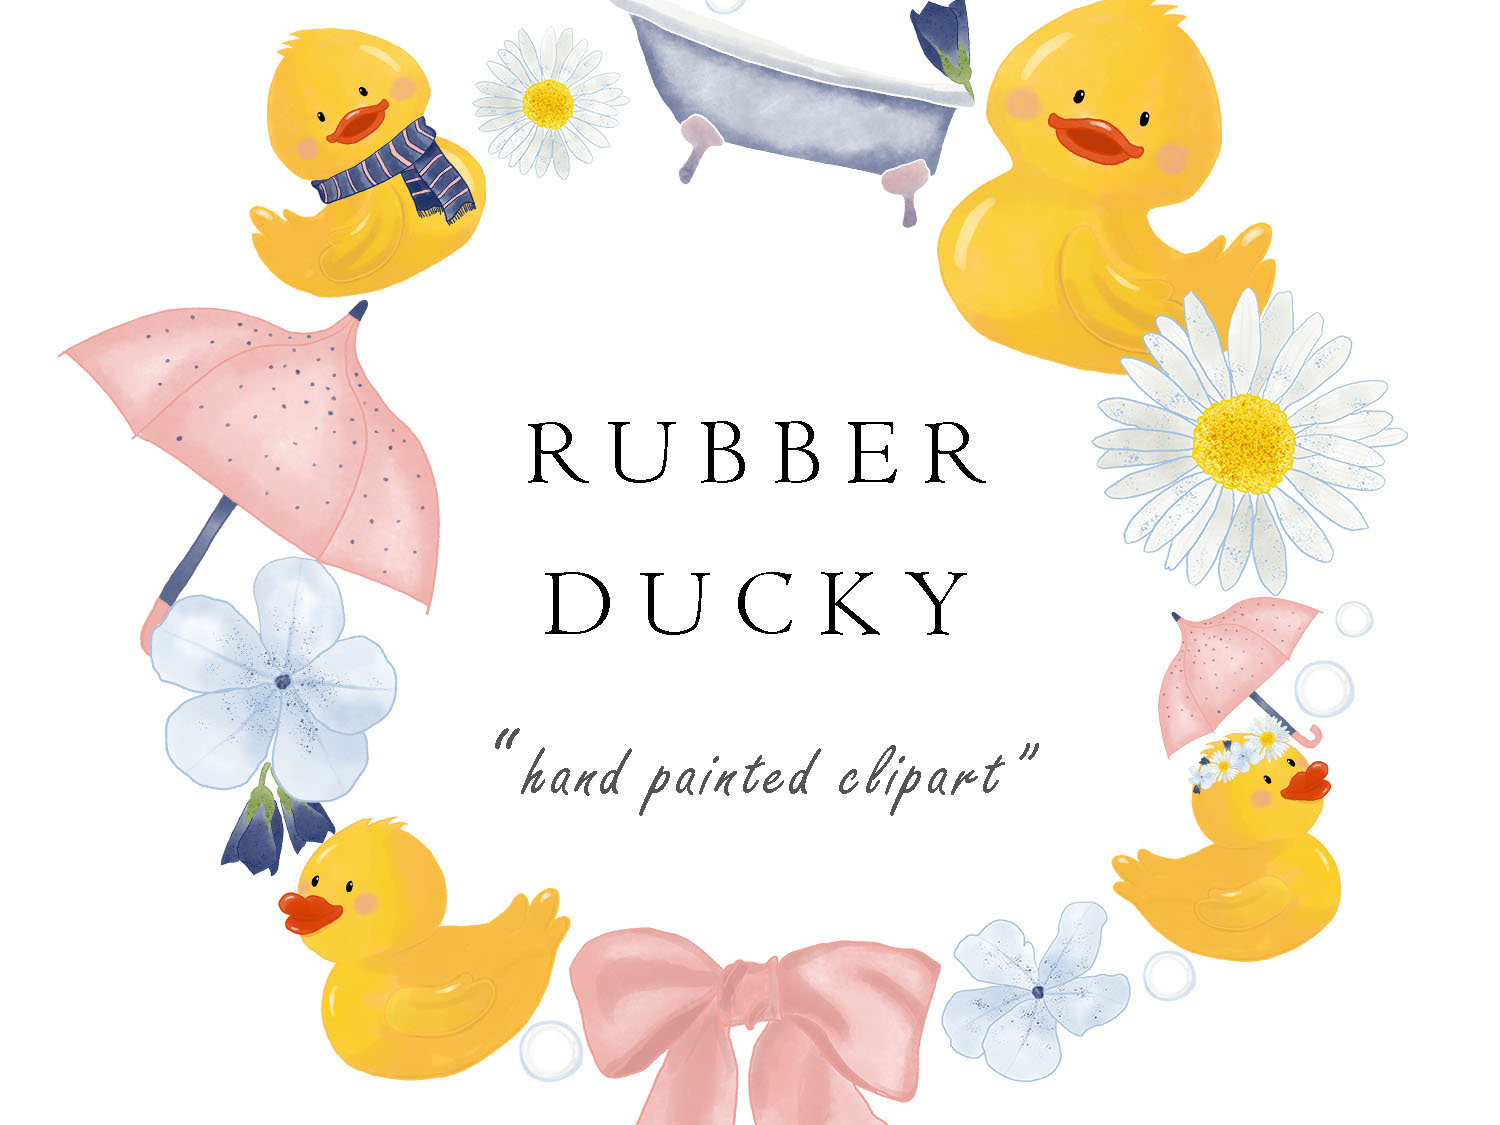 Watercolor Rubber Duck Clip Art Design by turnip on Dribbble